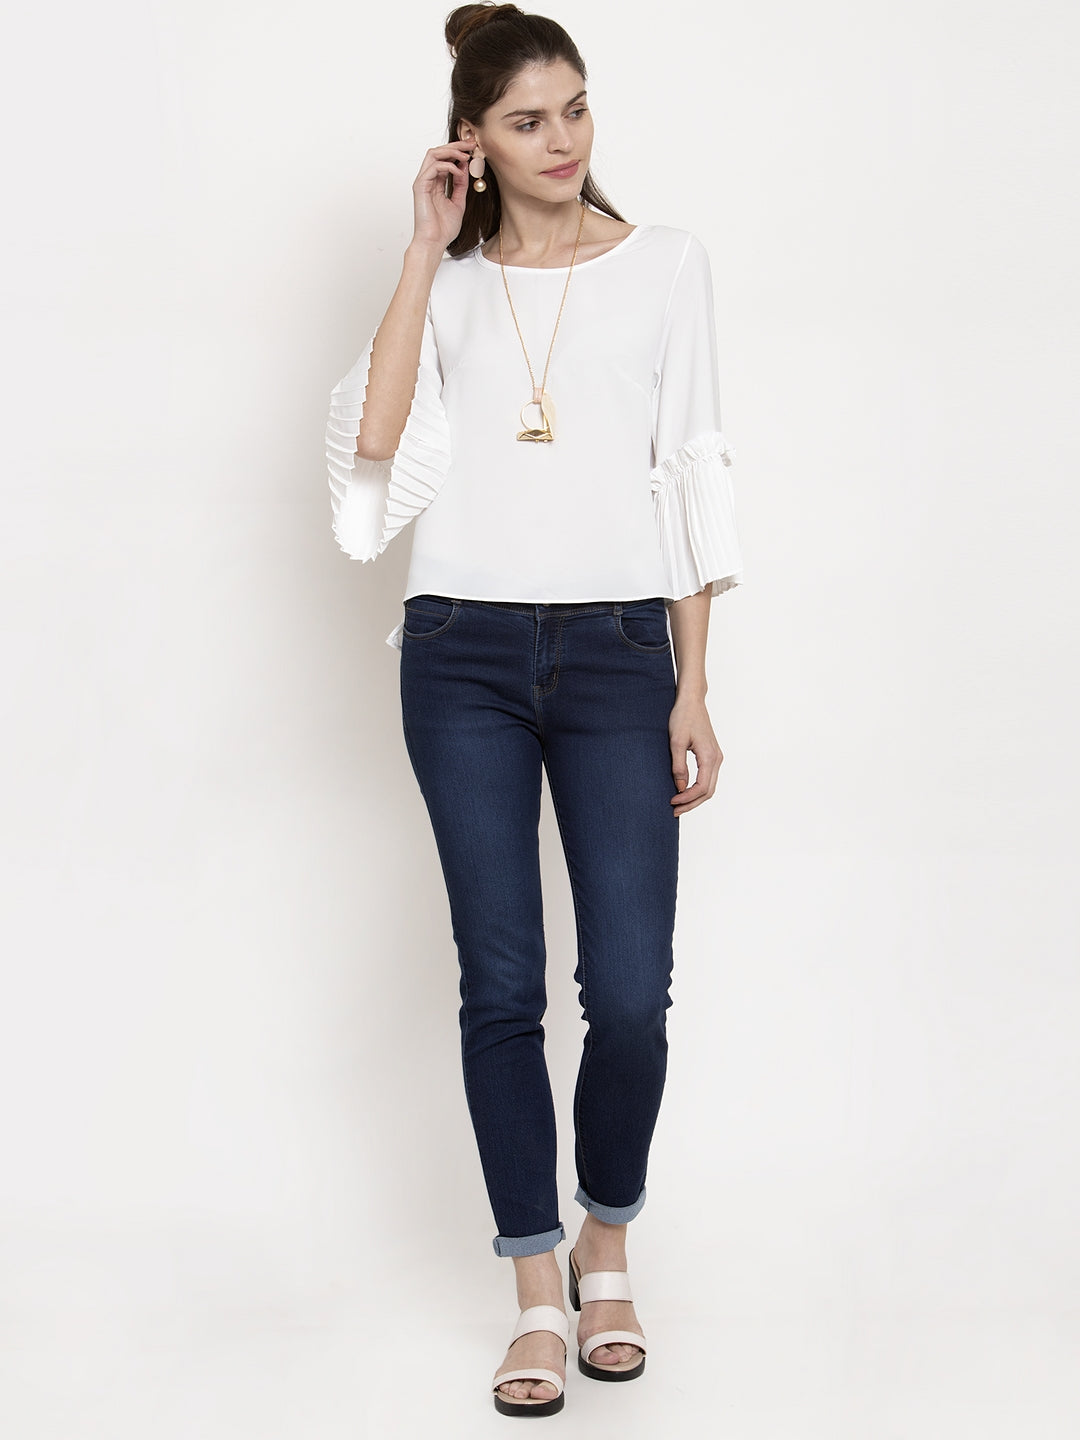 Ladies Flared-Fit Bell Sleeves White Top